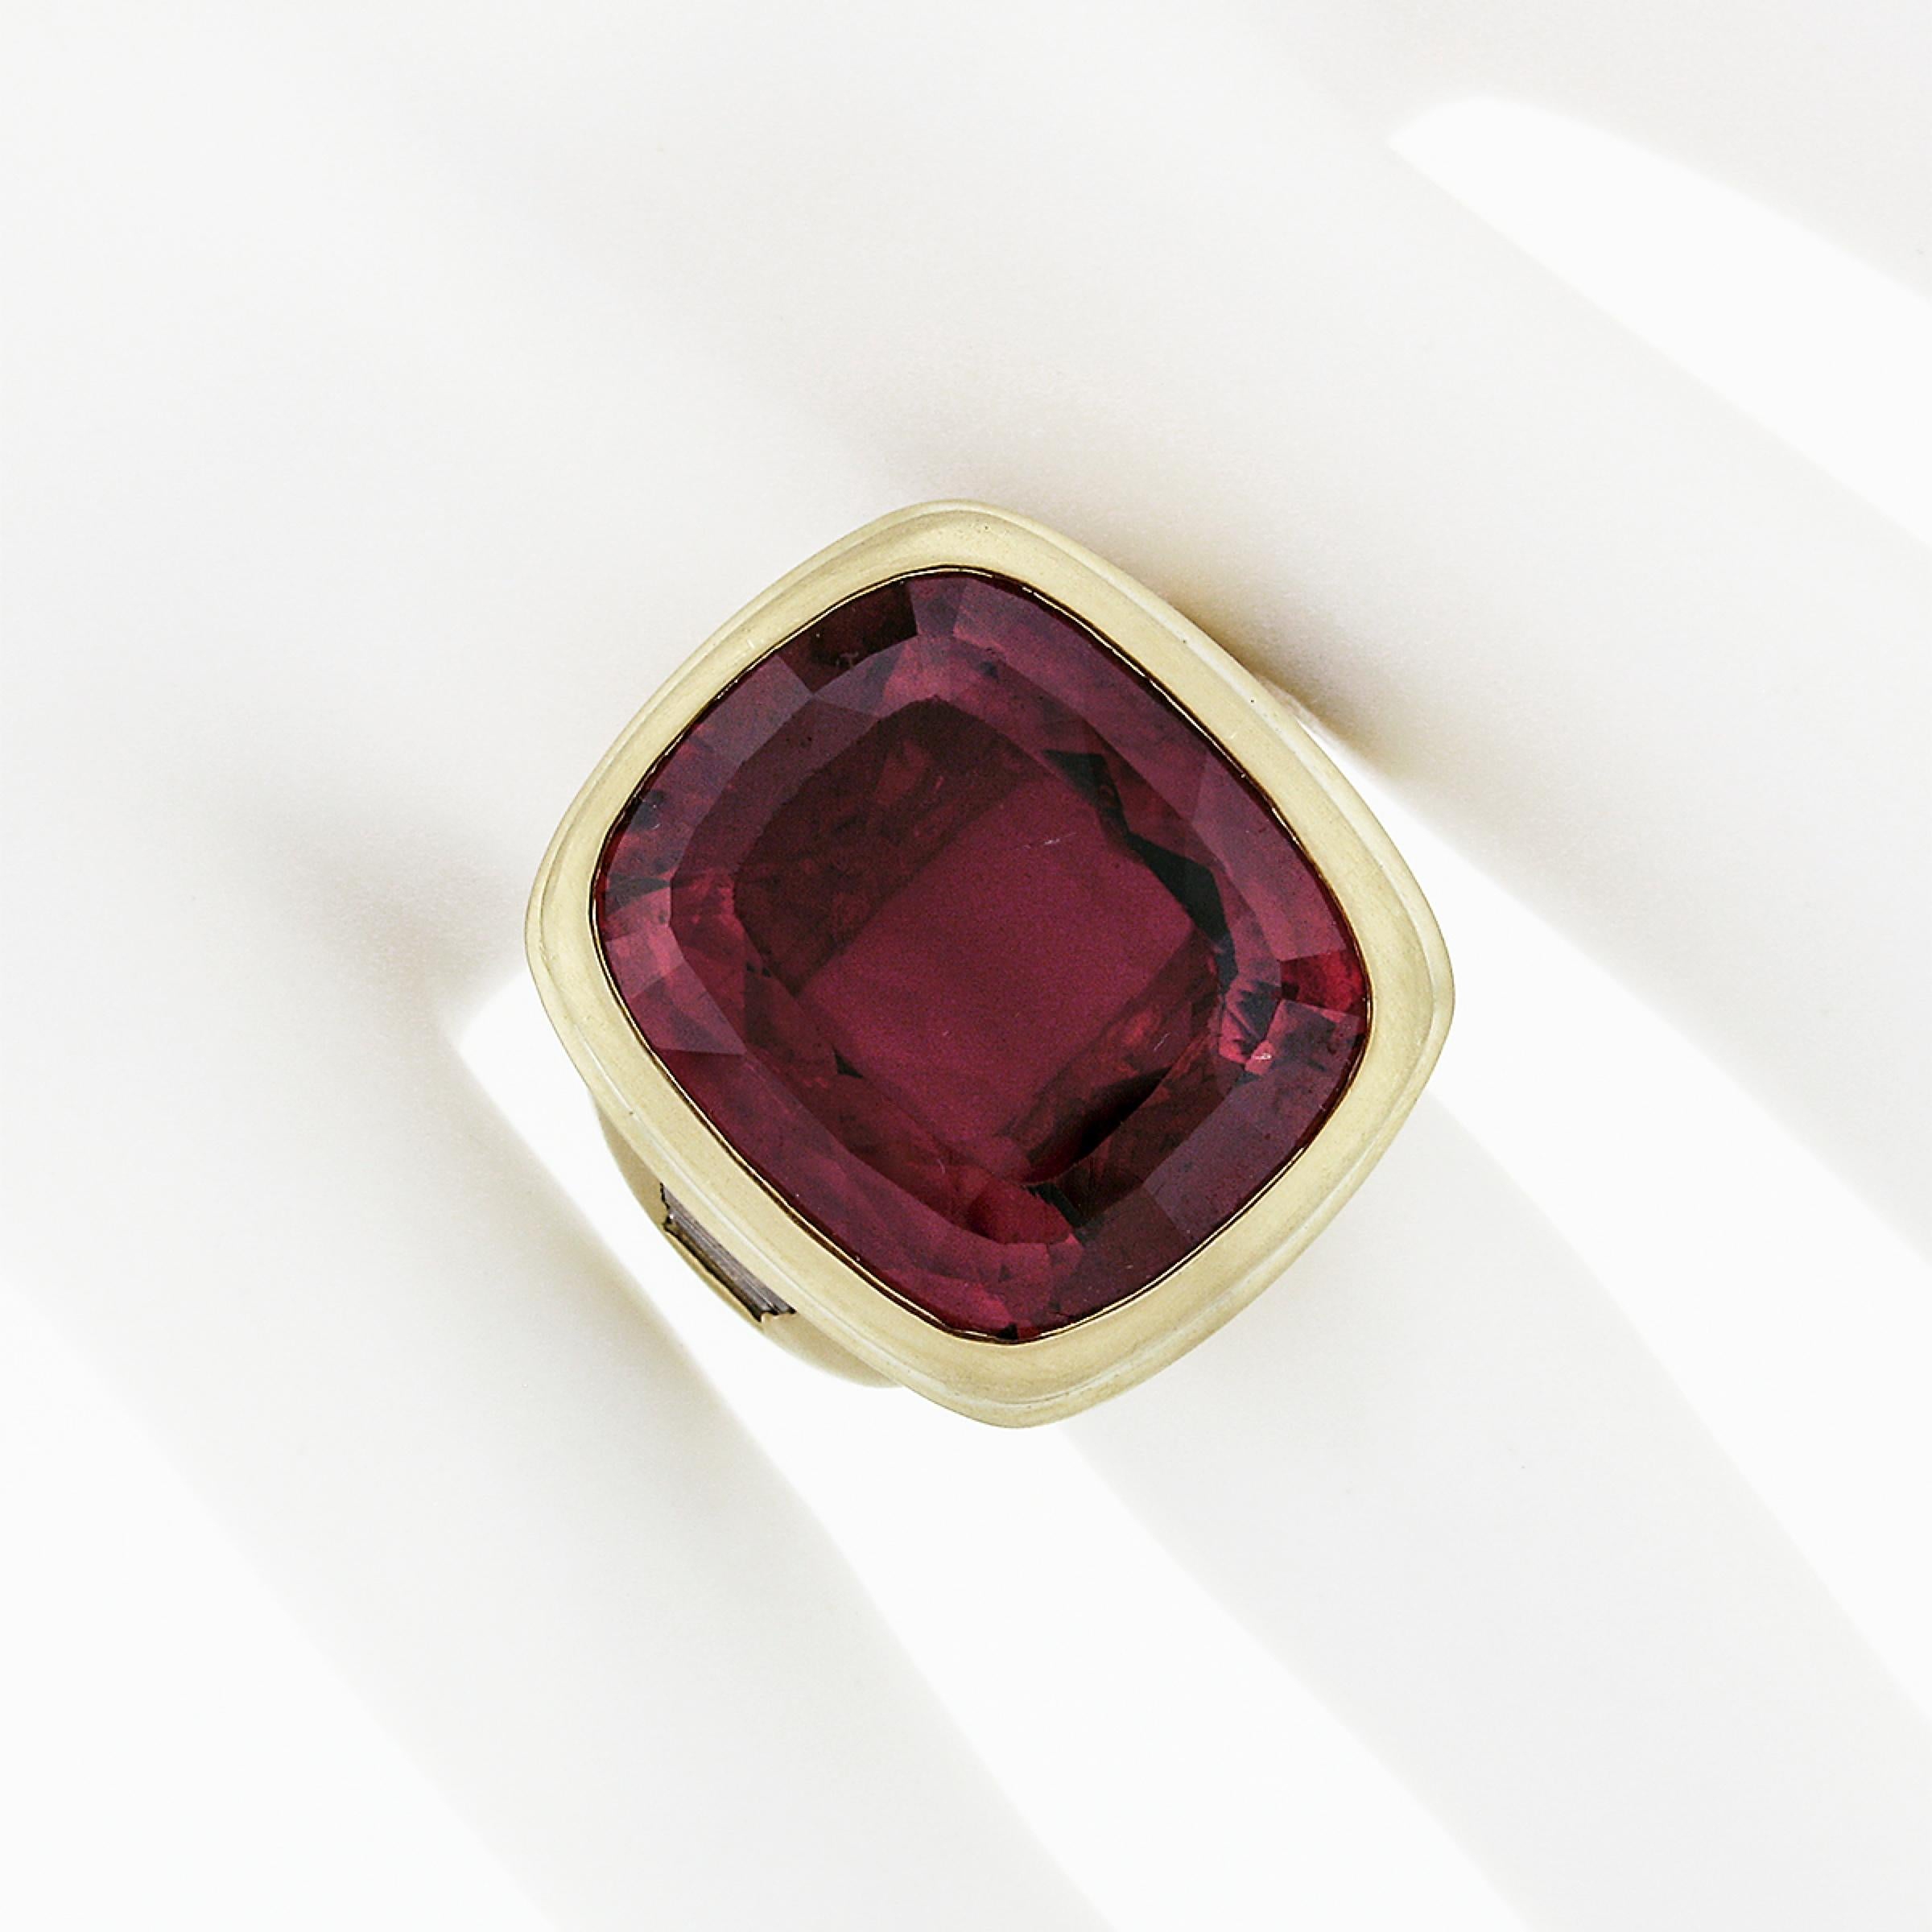 Kieselstein Cord 18k Gold Large GIA 20ct Bezel Rubellite Tourmaline Diamond Ring In Excellent Condition For Sale In Montclair, NJ